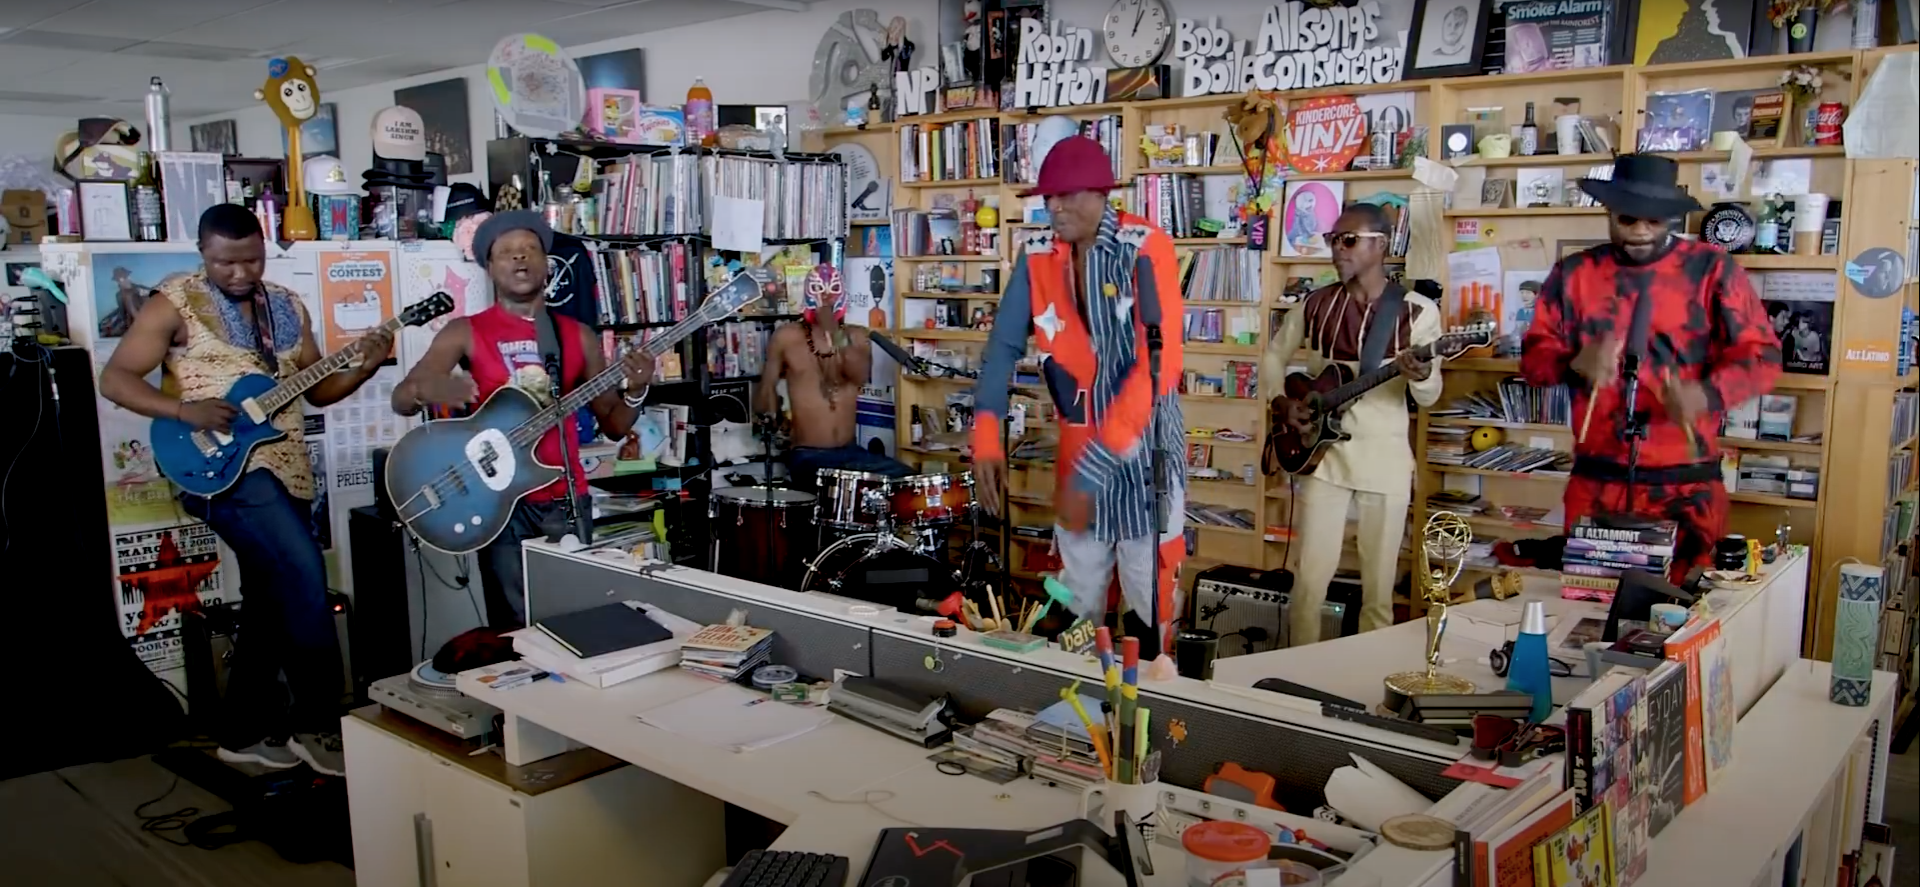 Allow Harry Styles's Tiny Desk Concert to Ease Your Mind